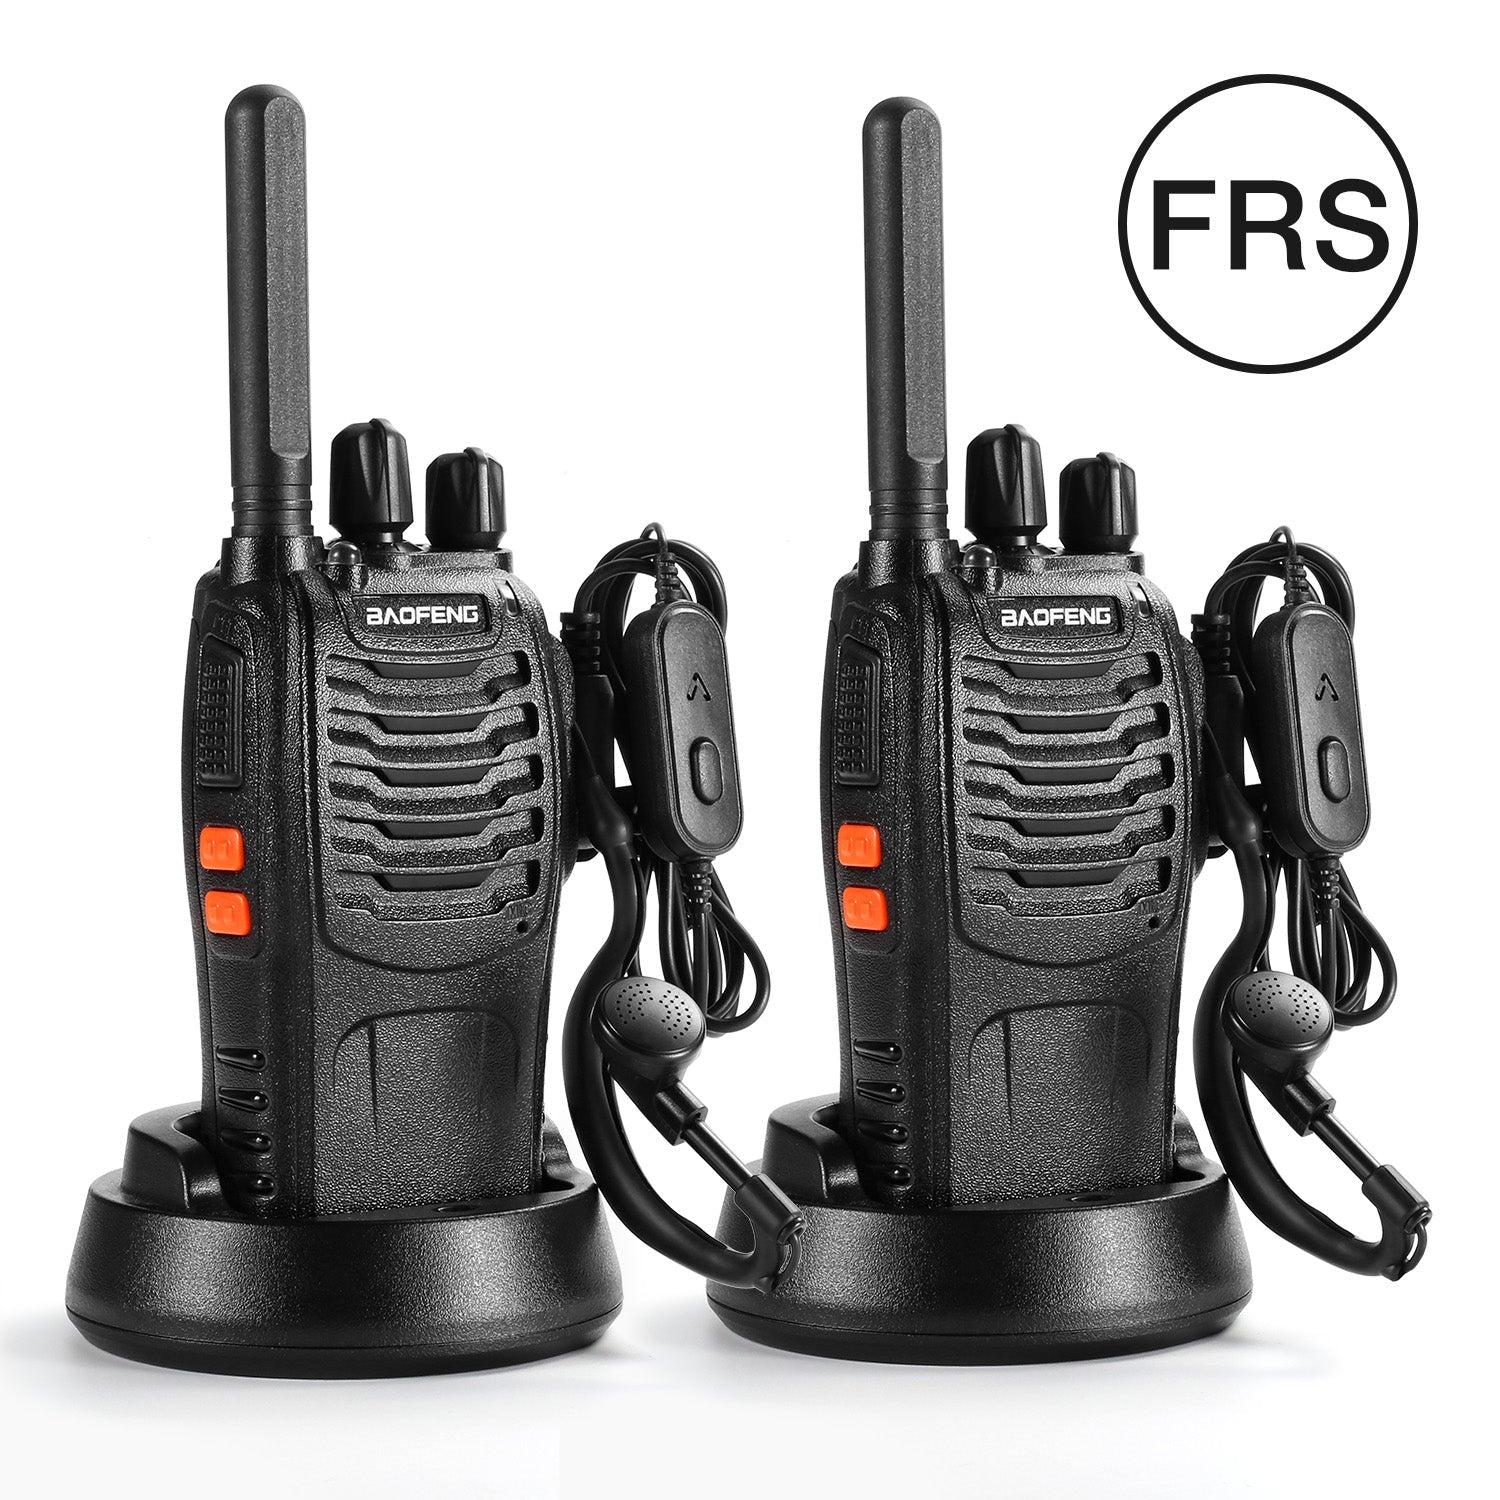 BAOFENG BF-88ST Walkie Talkies for Adults Long Range - 4 Pack, Portable Two  Way Radio with Hands Free VOX USB Charging, Rechargeable Radios Walkie